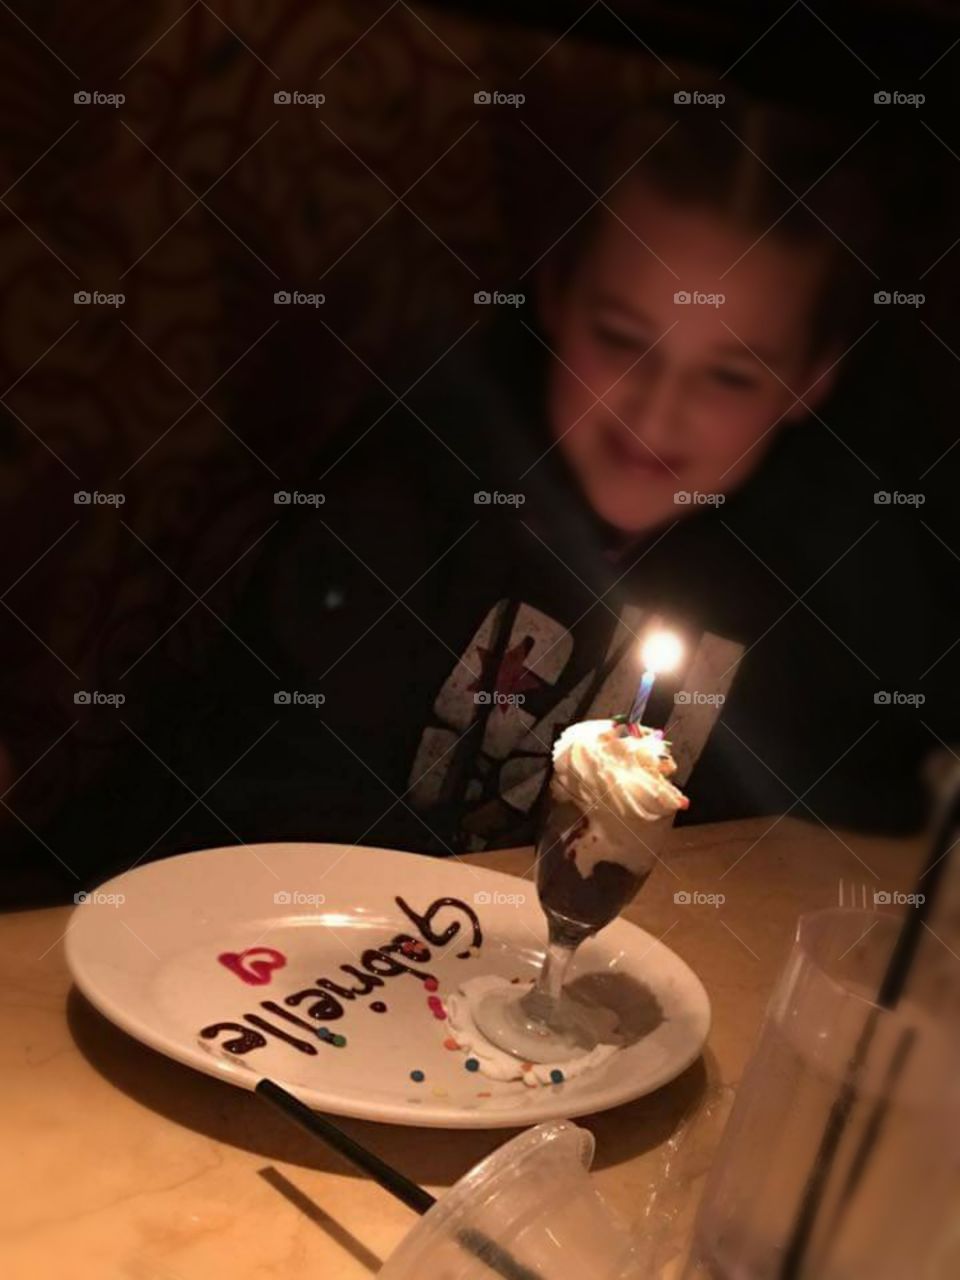 Girl looks at her candle-lit birthday treat with excitement and anticipation.